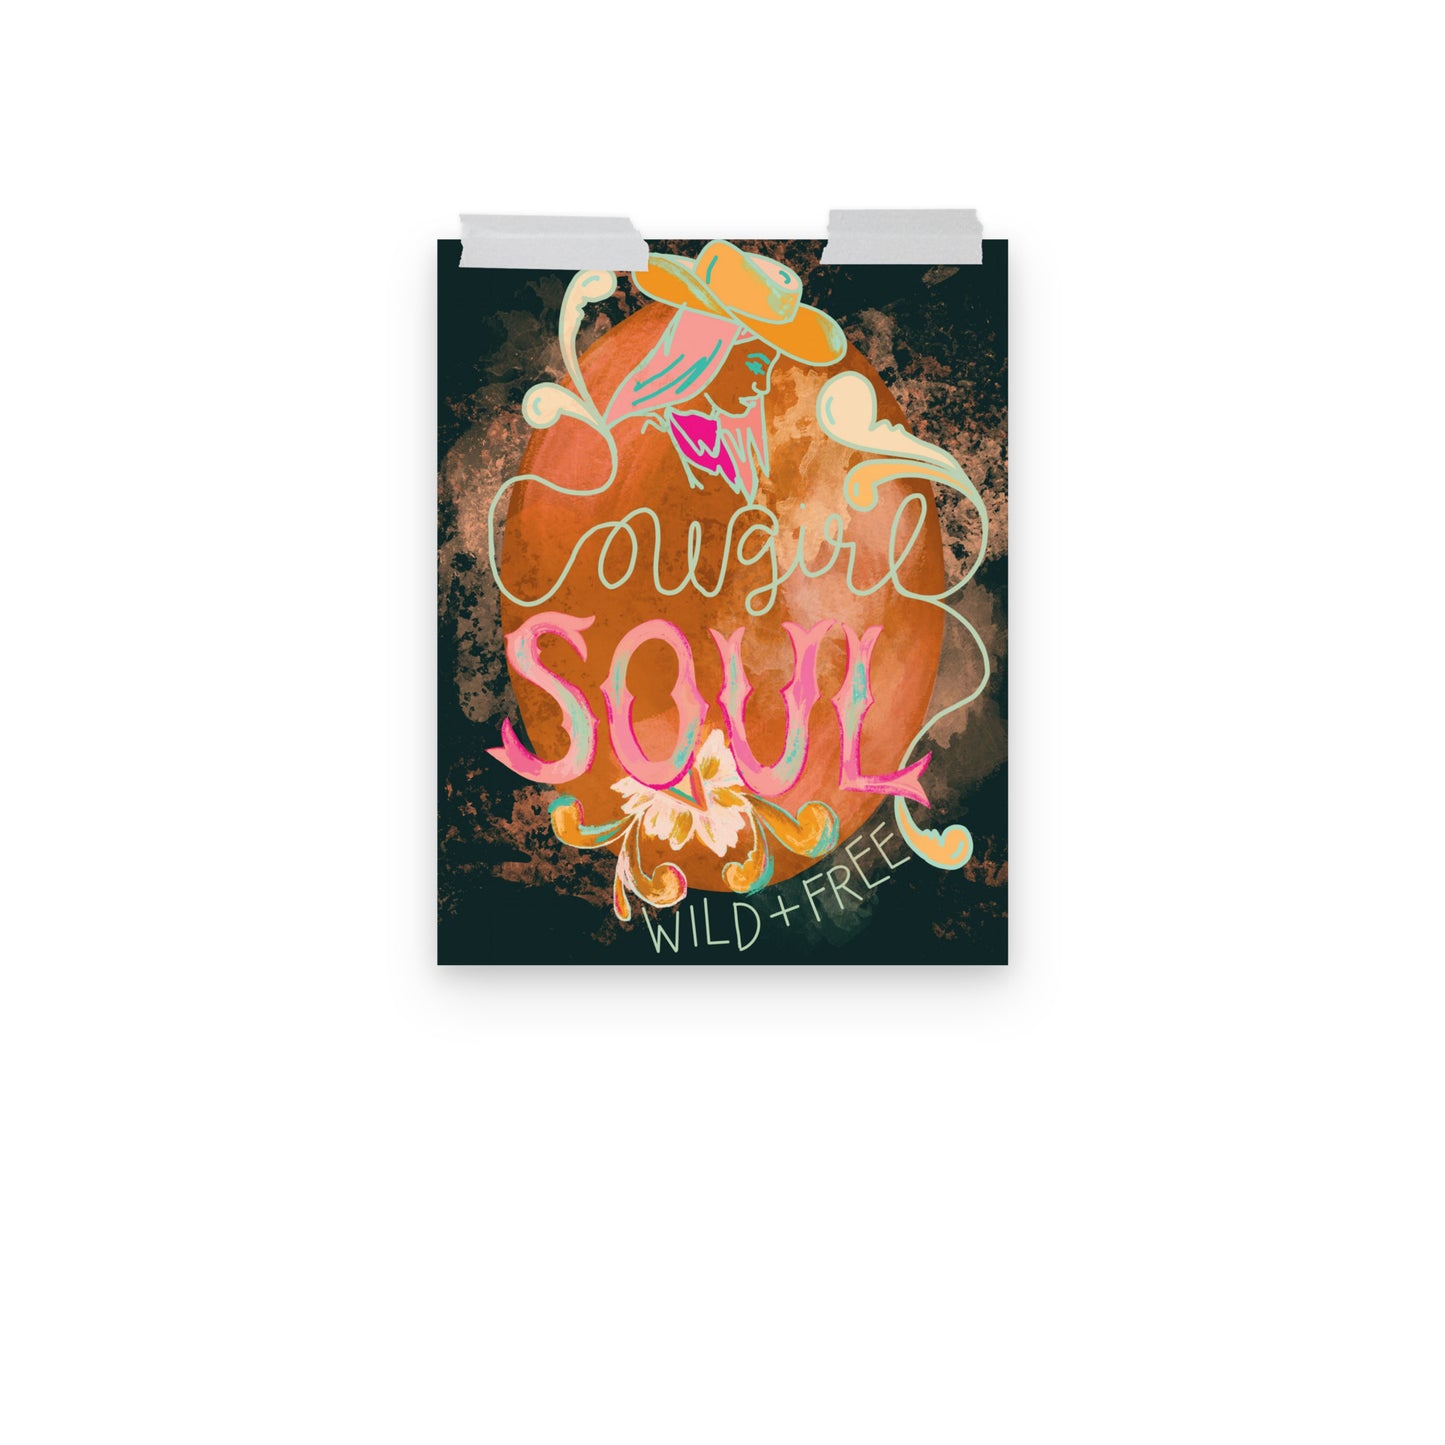 Cowgirl Soul Wild and Free Art Print